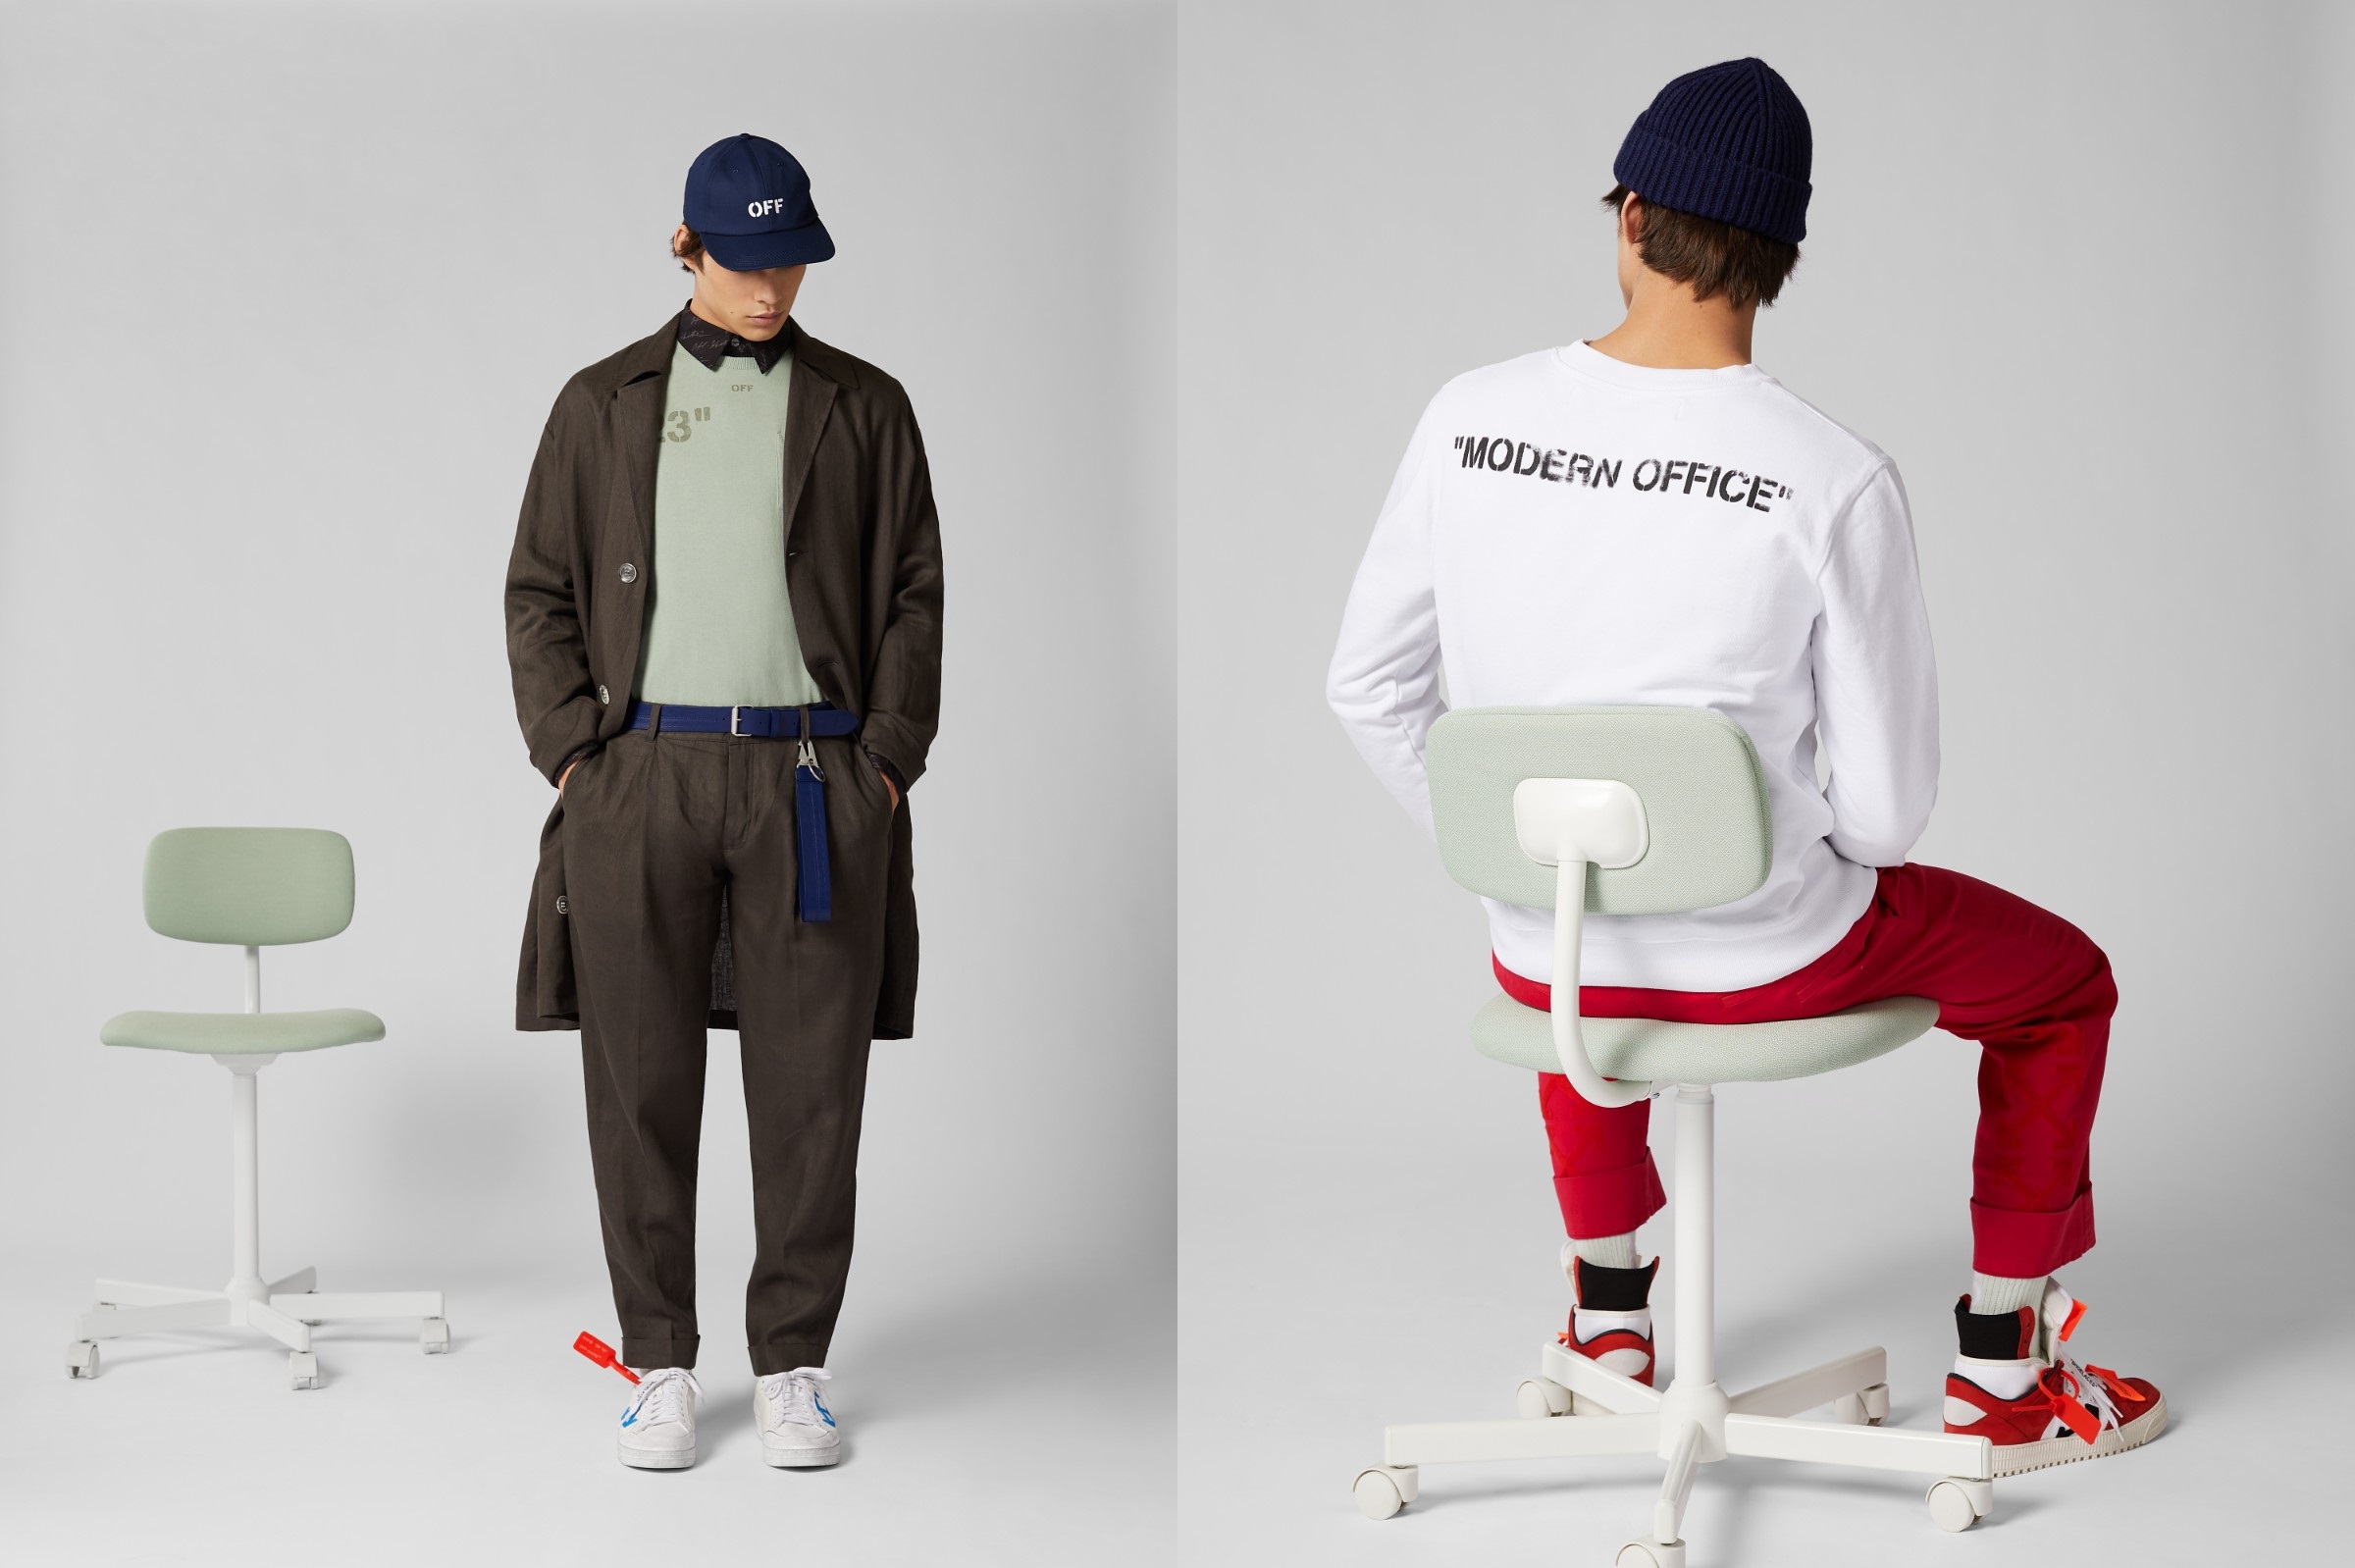 MR PORTER and Off-White™ Team Up for Exclusive “Modern Office” Collection